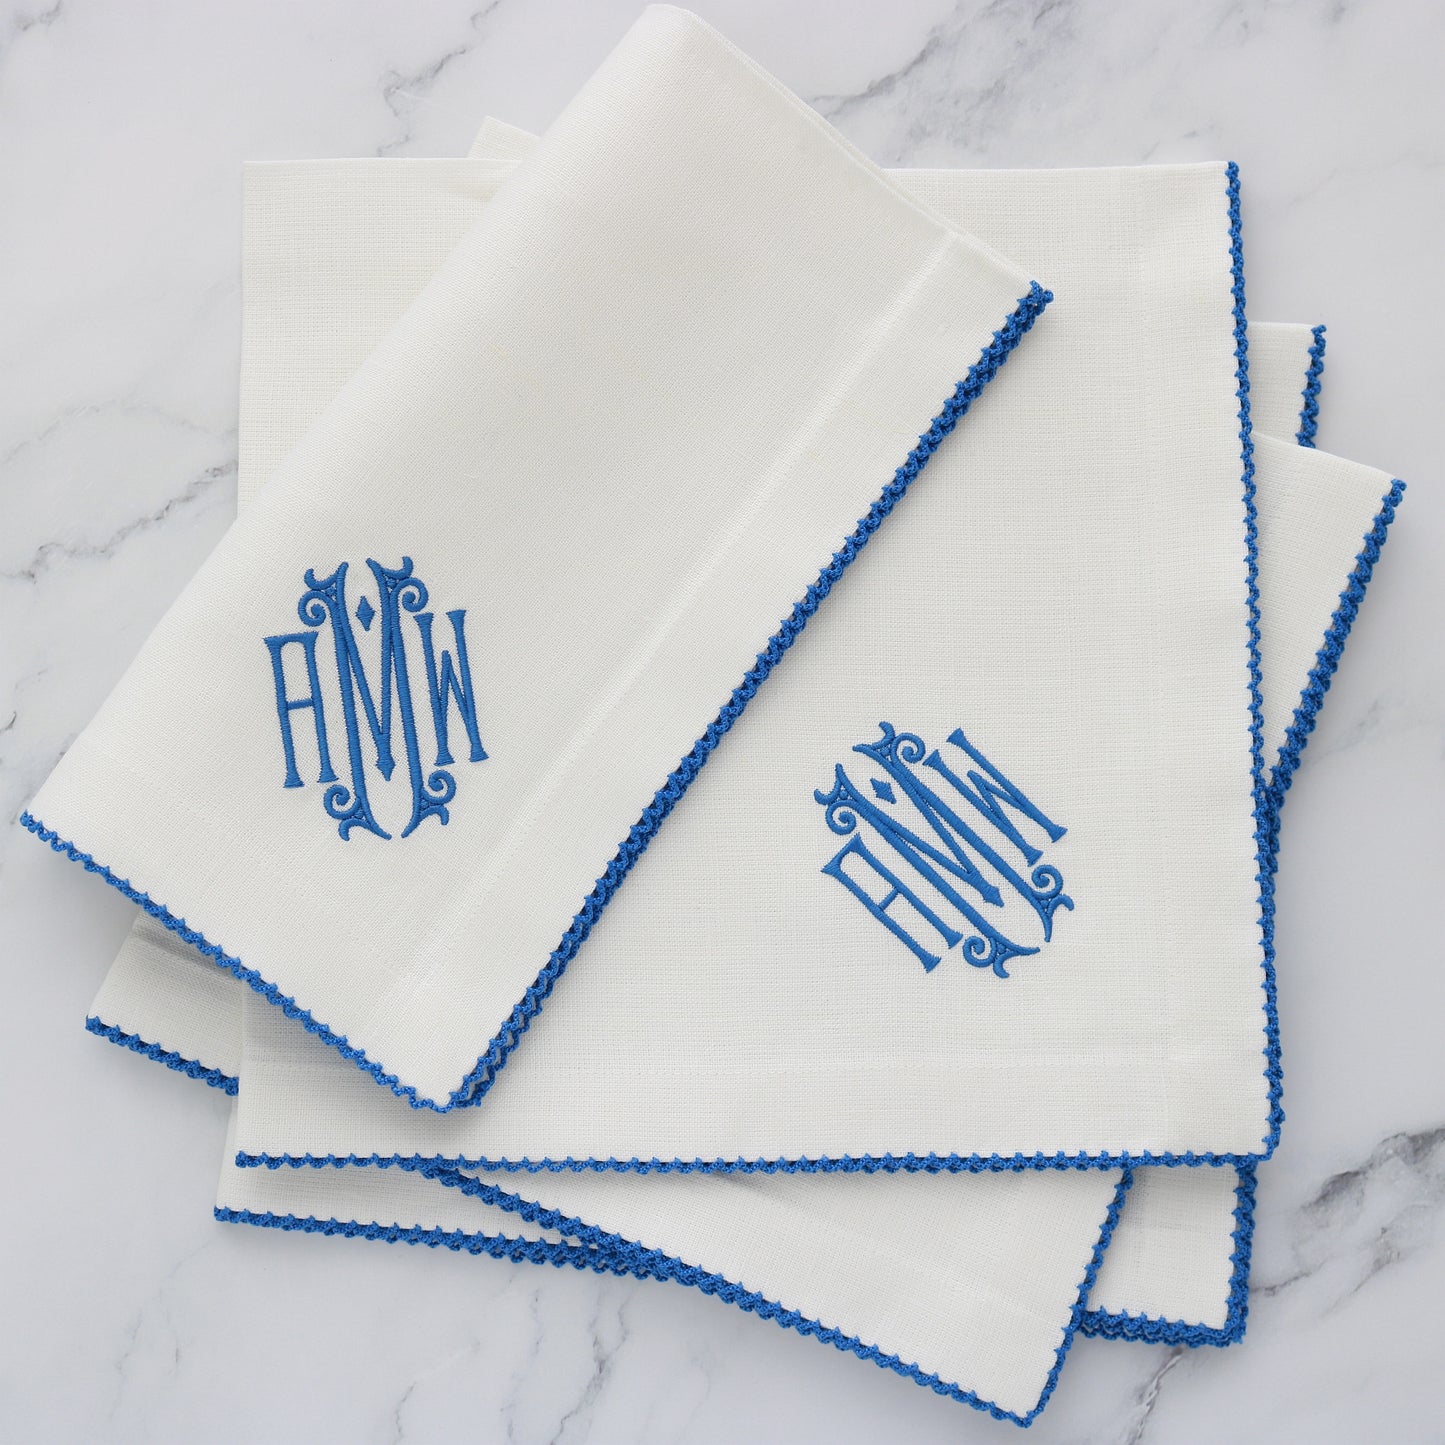 set of 4 White napkins with Pacific Blue picot trim and matching monogram AMW